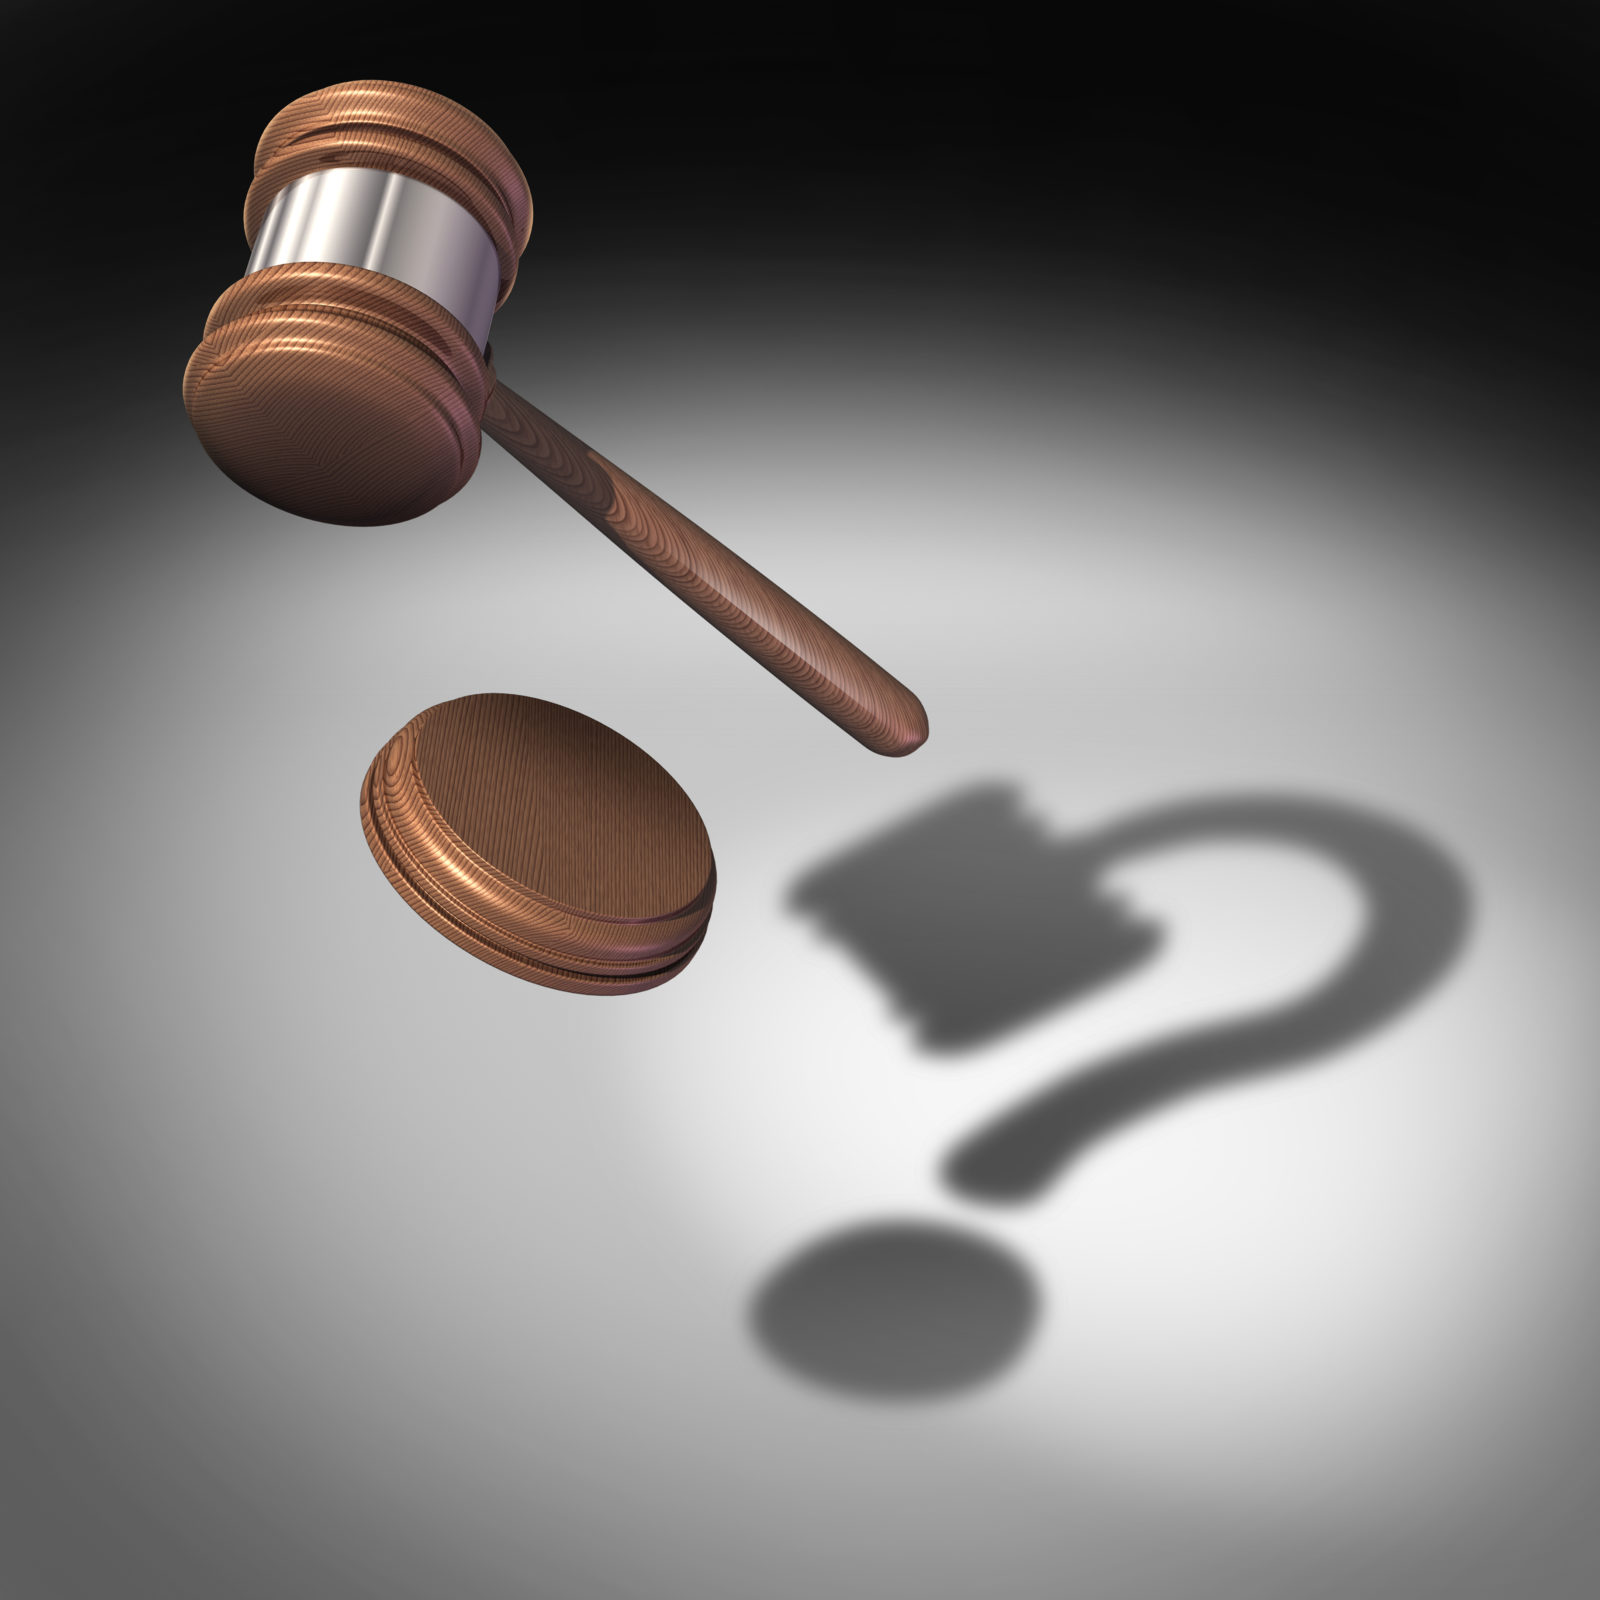 The Promise of Due Process in 21st Century Litigation